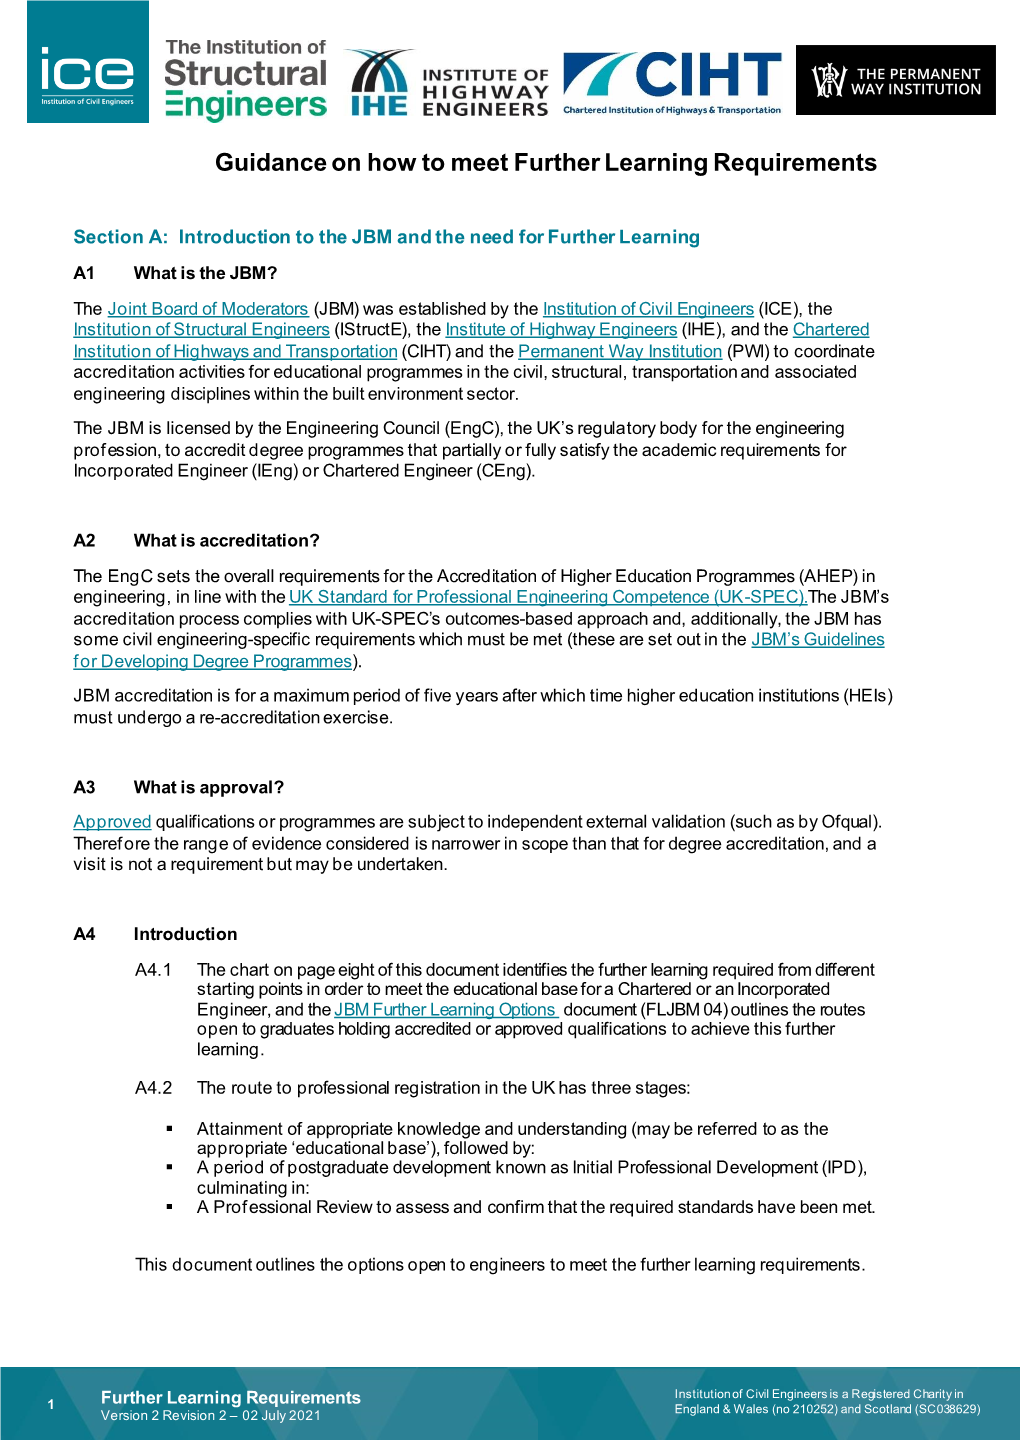 Guidance on How to Meet Further Learning Requirements